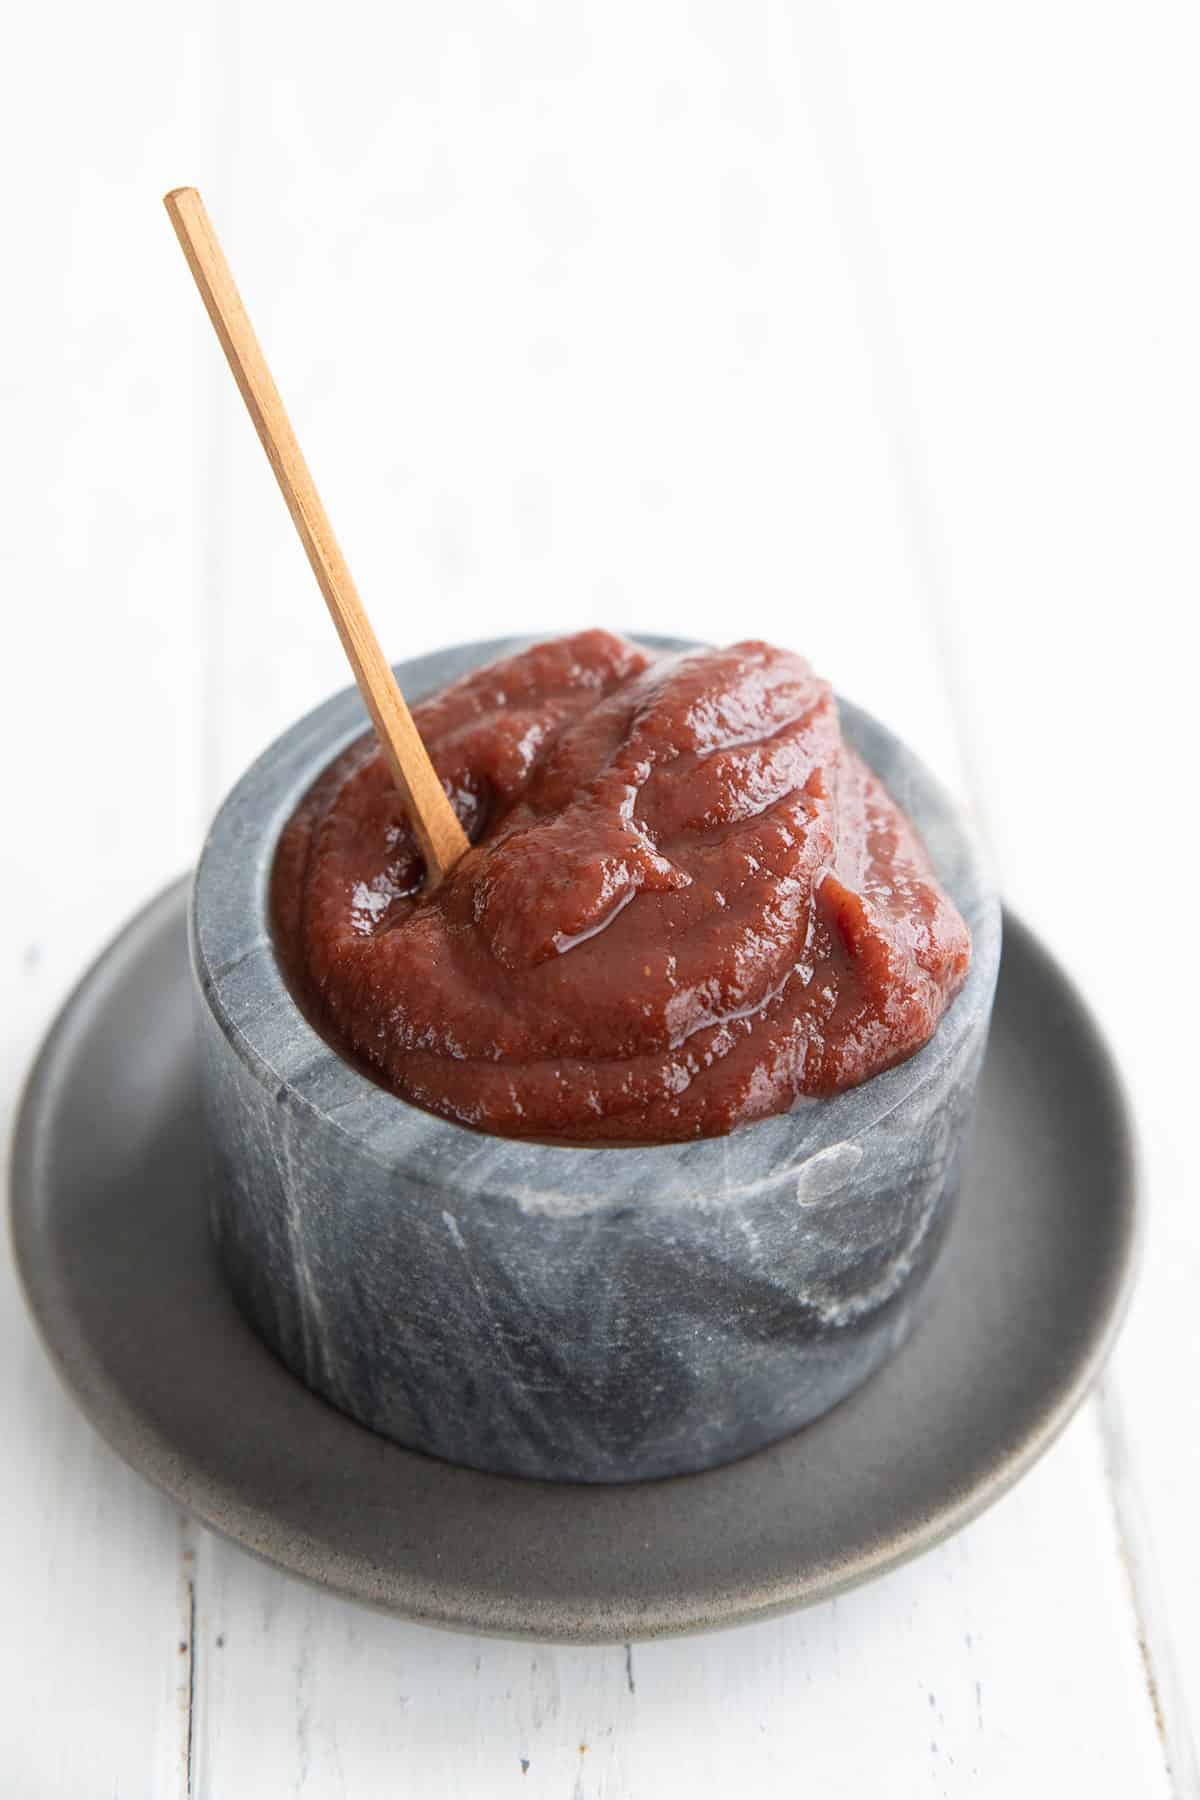 Sugar Free Ketchup piled up in a gray marble bowl with a small wooden spoon sticking out.